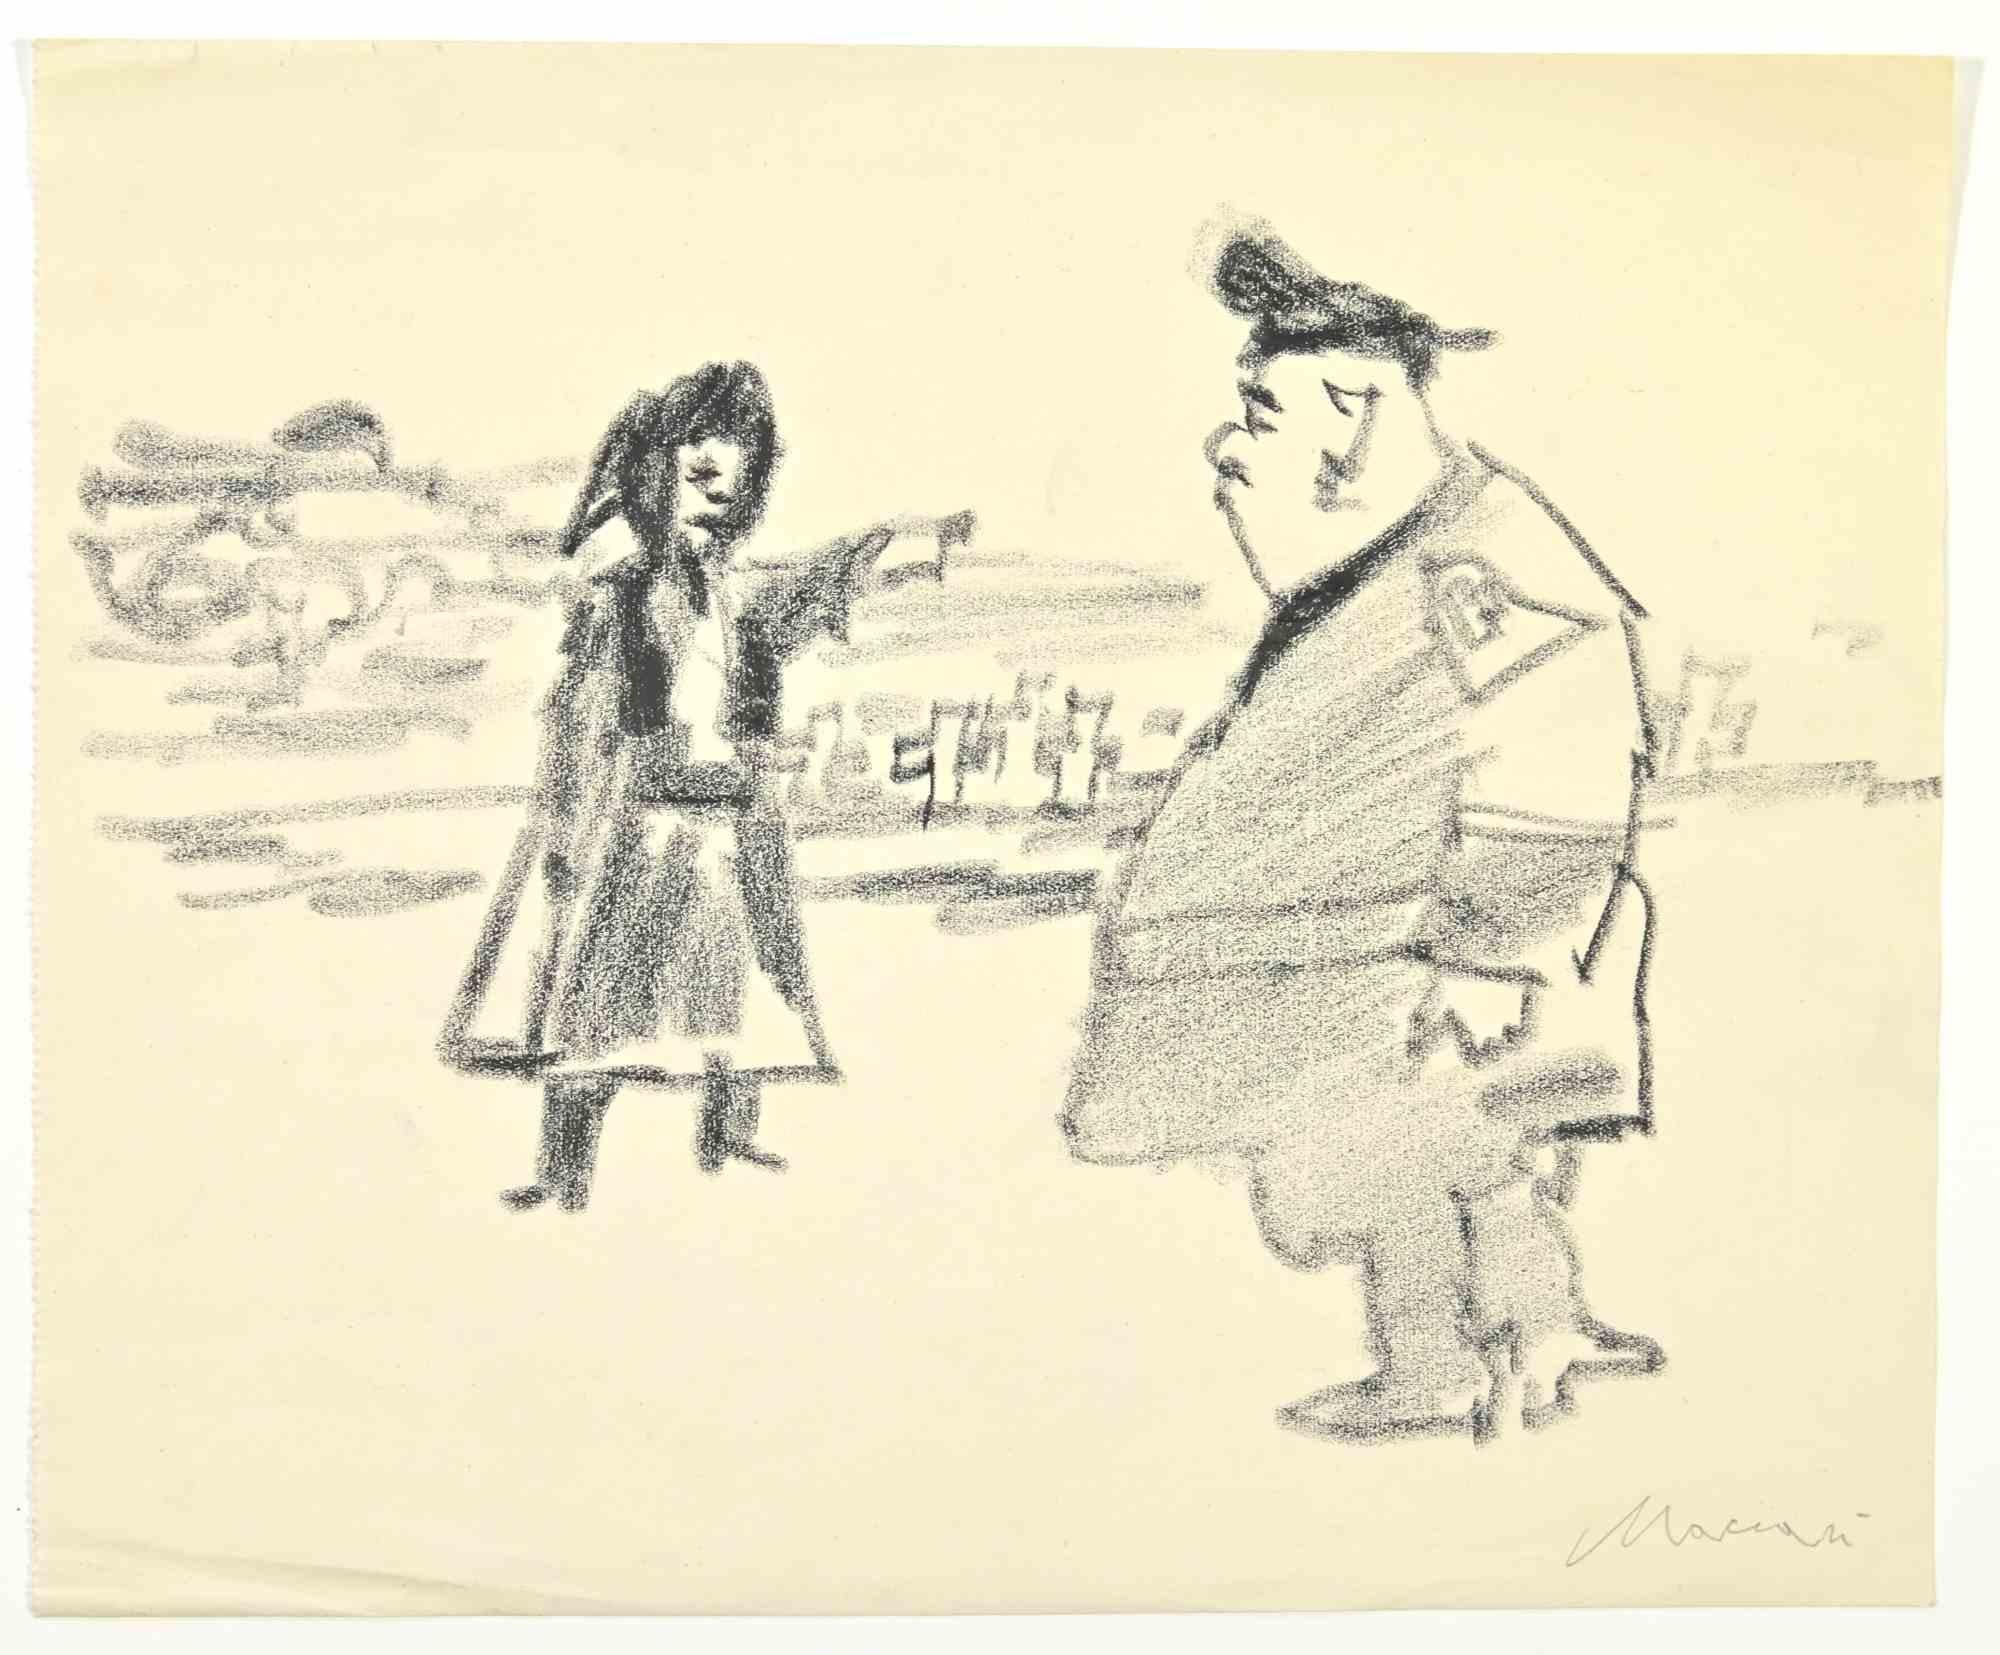 Police and Woman is a Pencil Drawing realized by Mino Maccari  (1924-1989) in the 1945.

Hand-signed on the lower.

Good condition.

Mino Maccari (Siena, 1924-Rome, June 16, 1989) was an Italian writer, painter, engraver and journalist, winner of